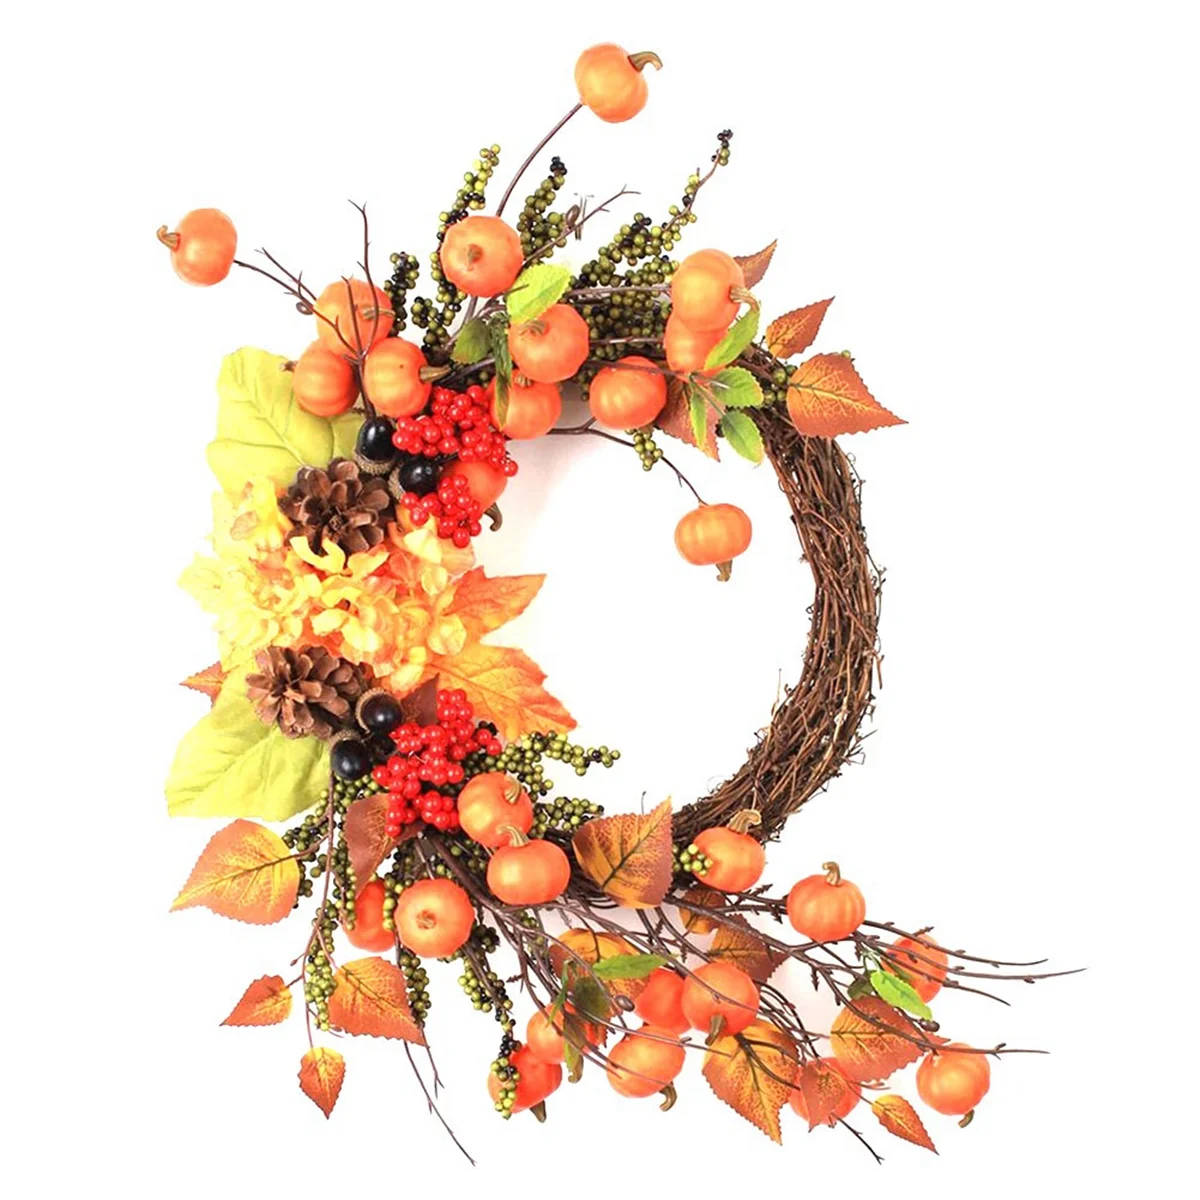 

Fall Decor Fall Wreath for Front Door Pumpkins Berries Wreath Decorations for Autumn Thanksgiving Harvest Farmhouse Home